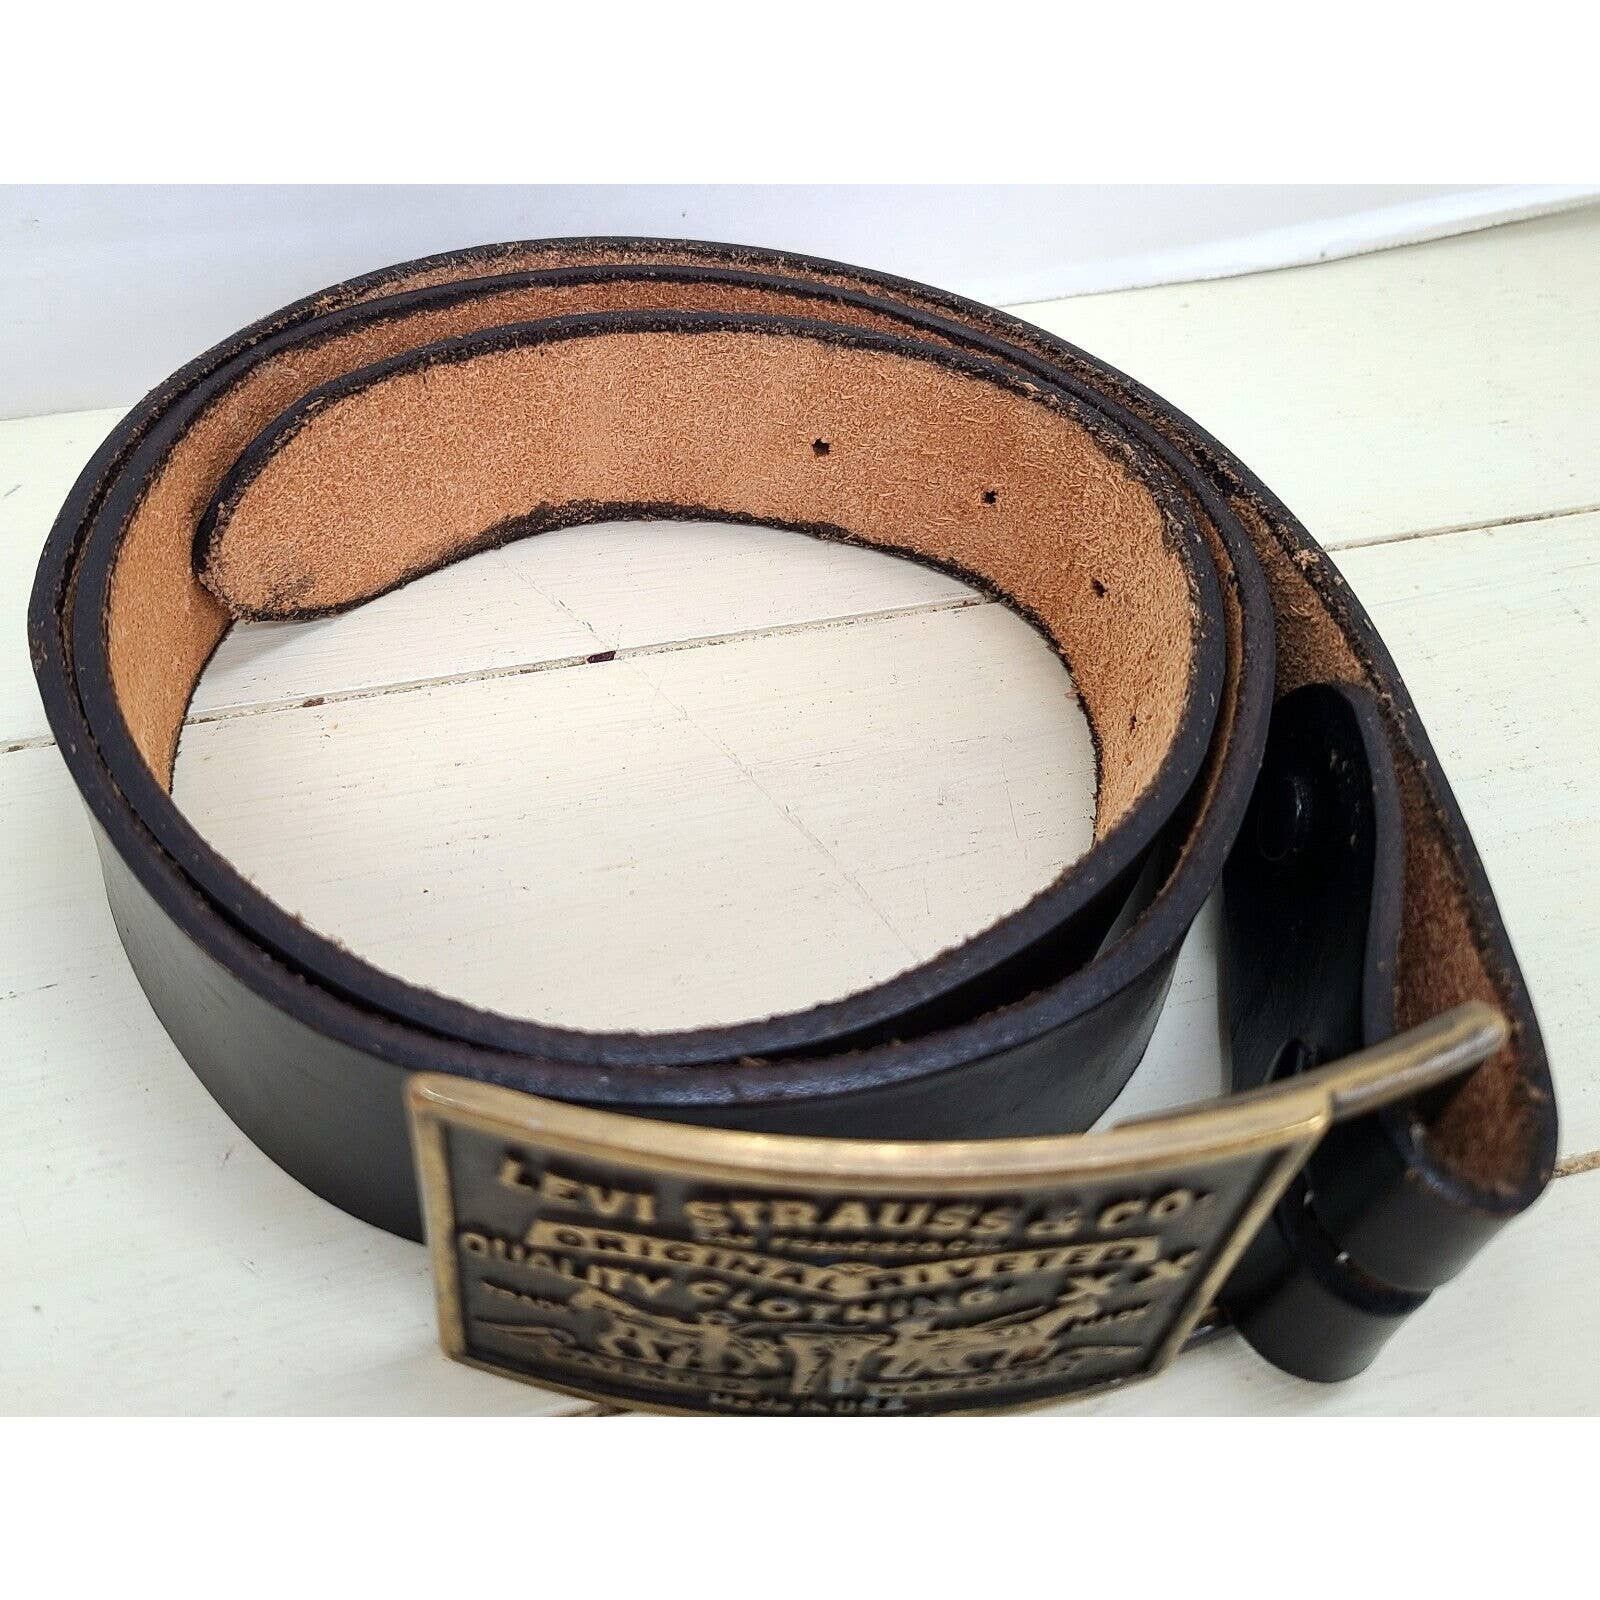 Levi's Vintage Levis Belt and Buckle Riveted Genuine Leather 44 in 